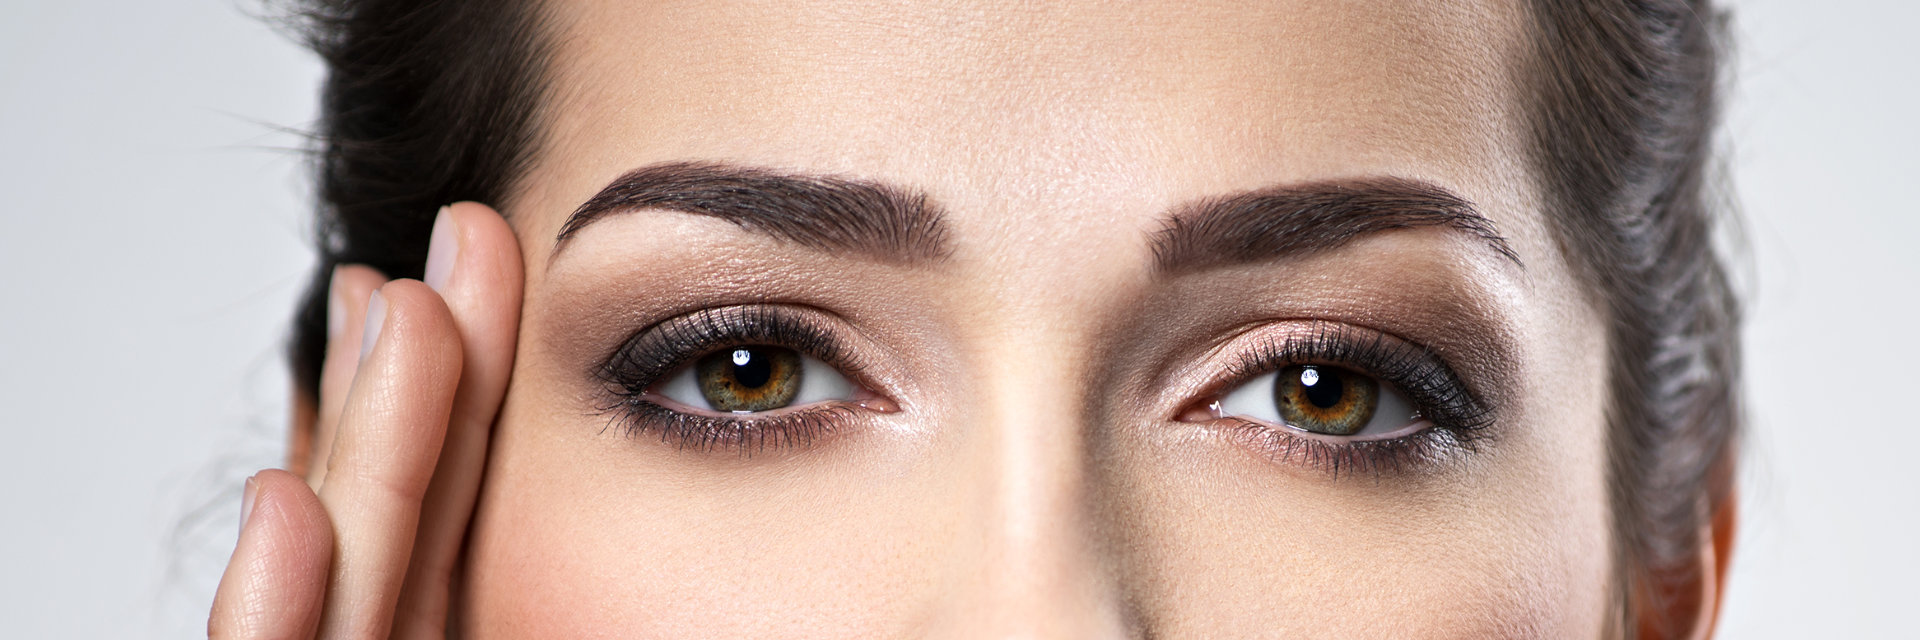 beautiful woman's eyes and brows